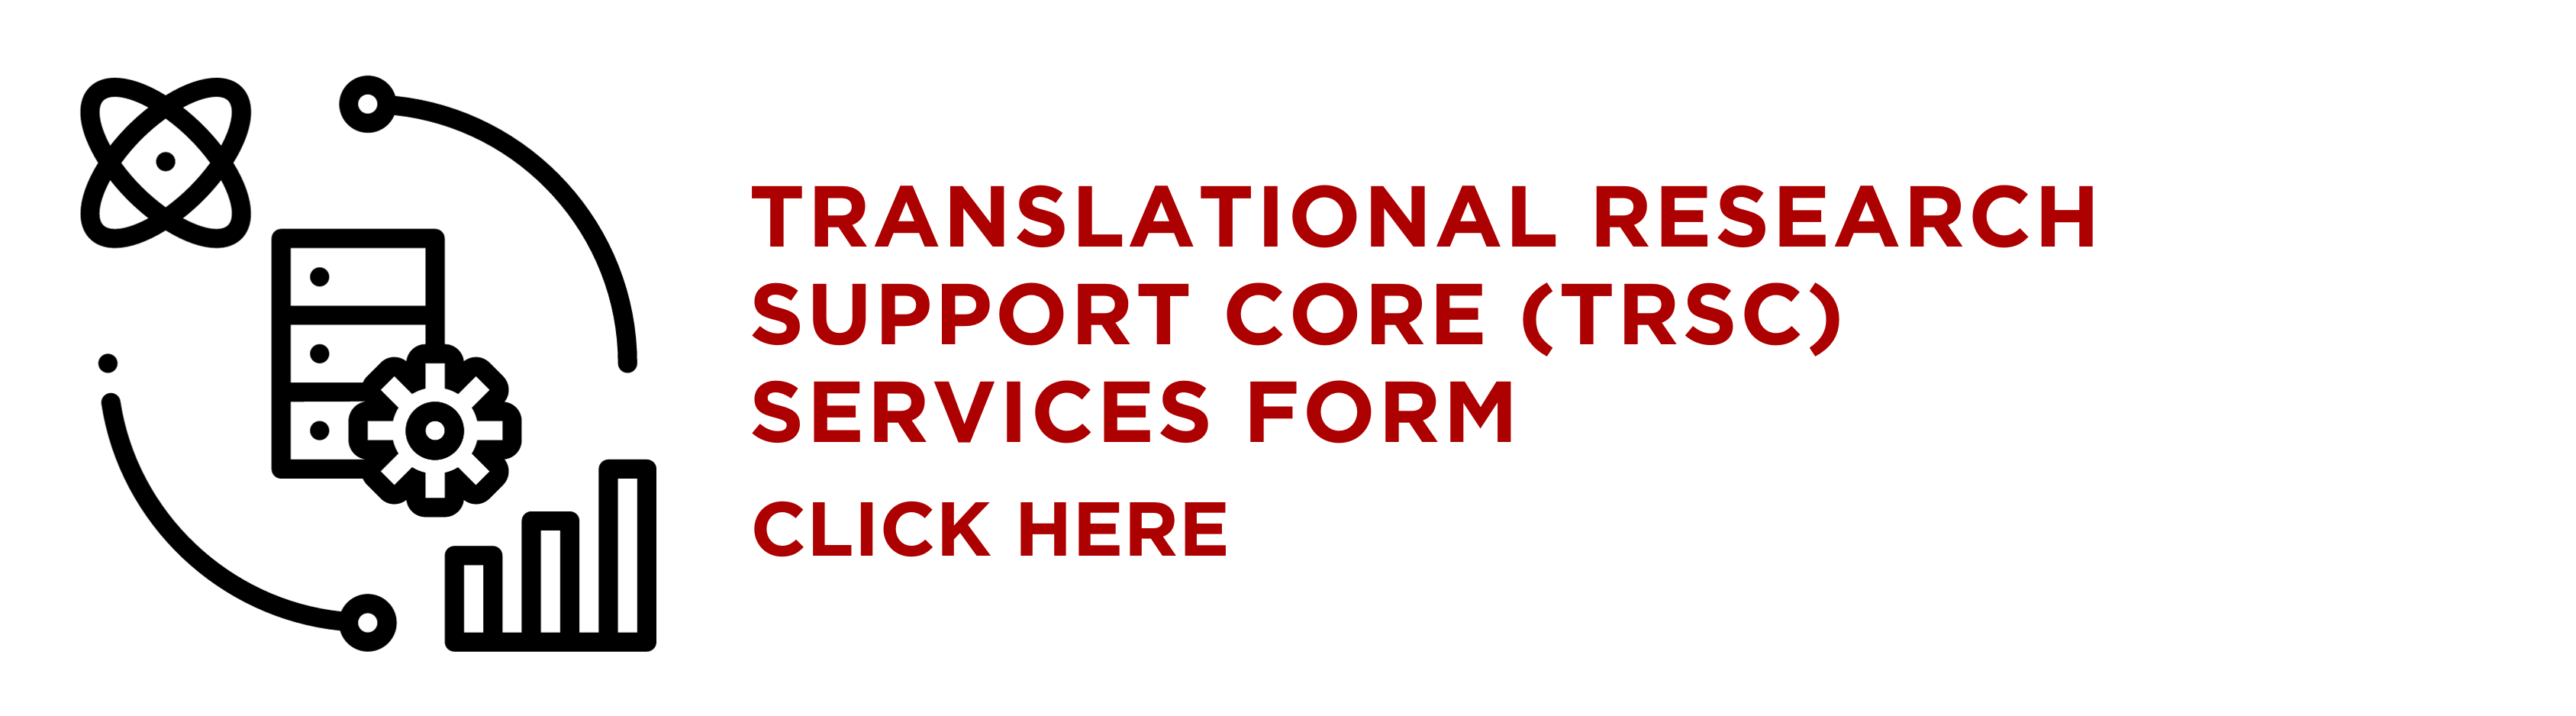 Translational Research Support Core (TRSC) Services Form image